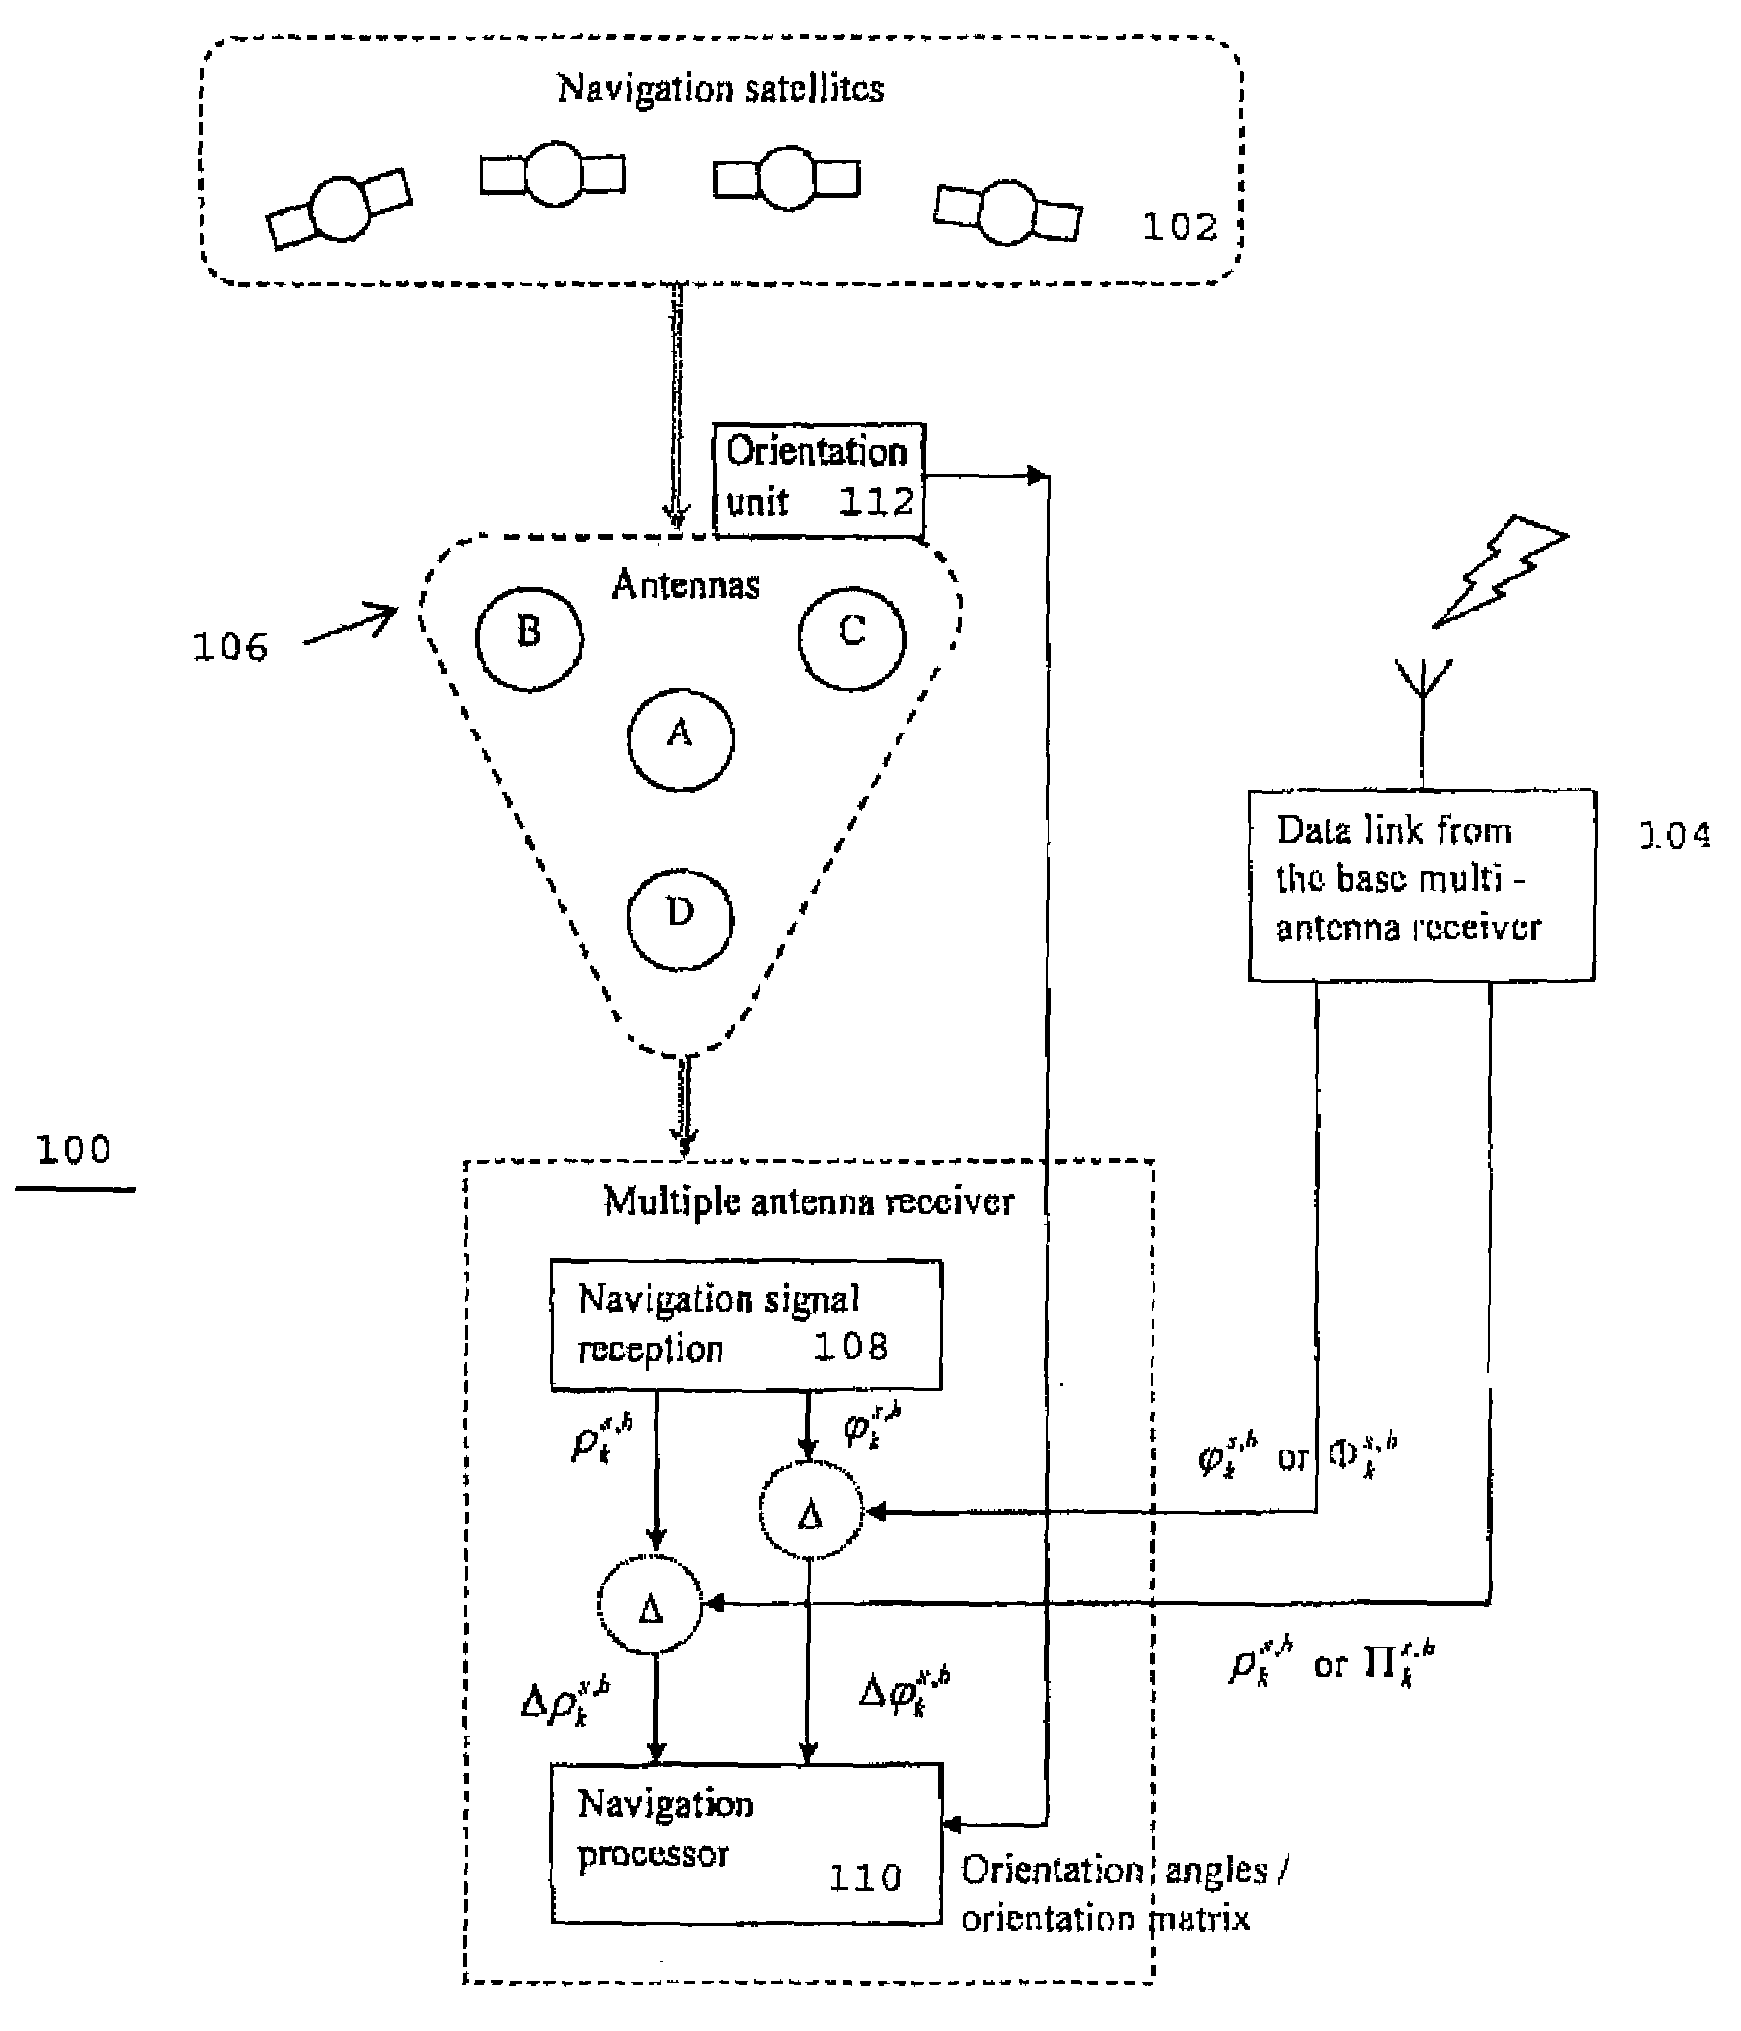 Satellite differential positioning receiver using multiple base-rover antennas